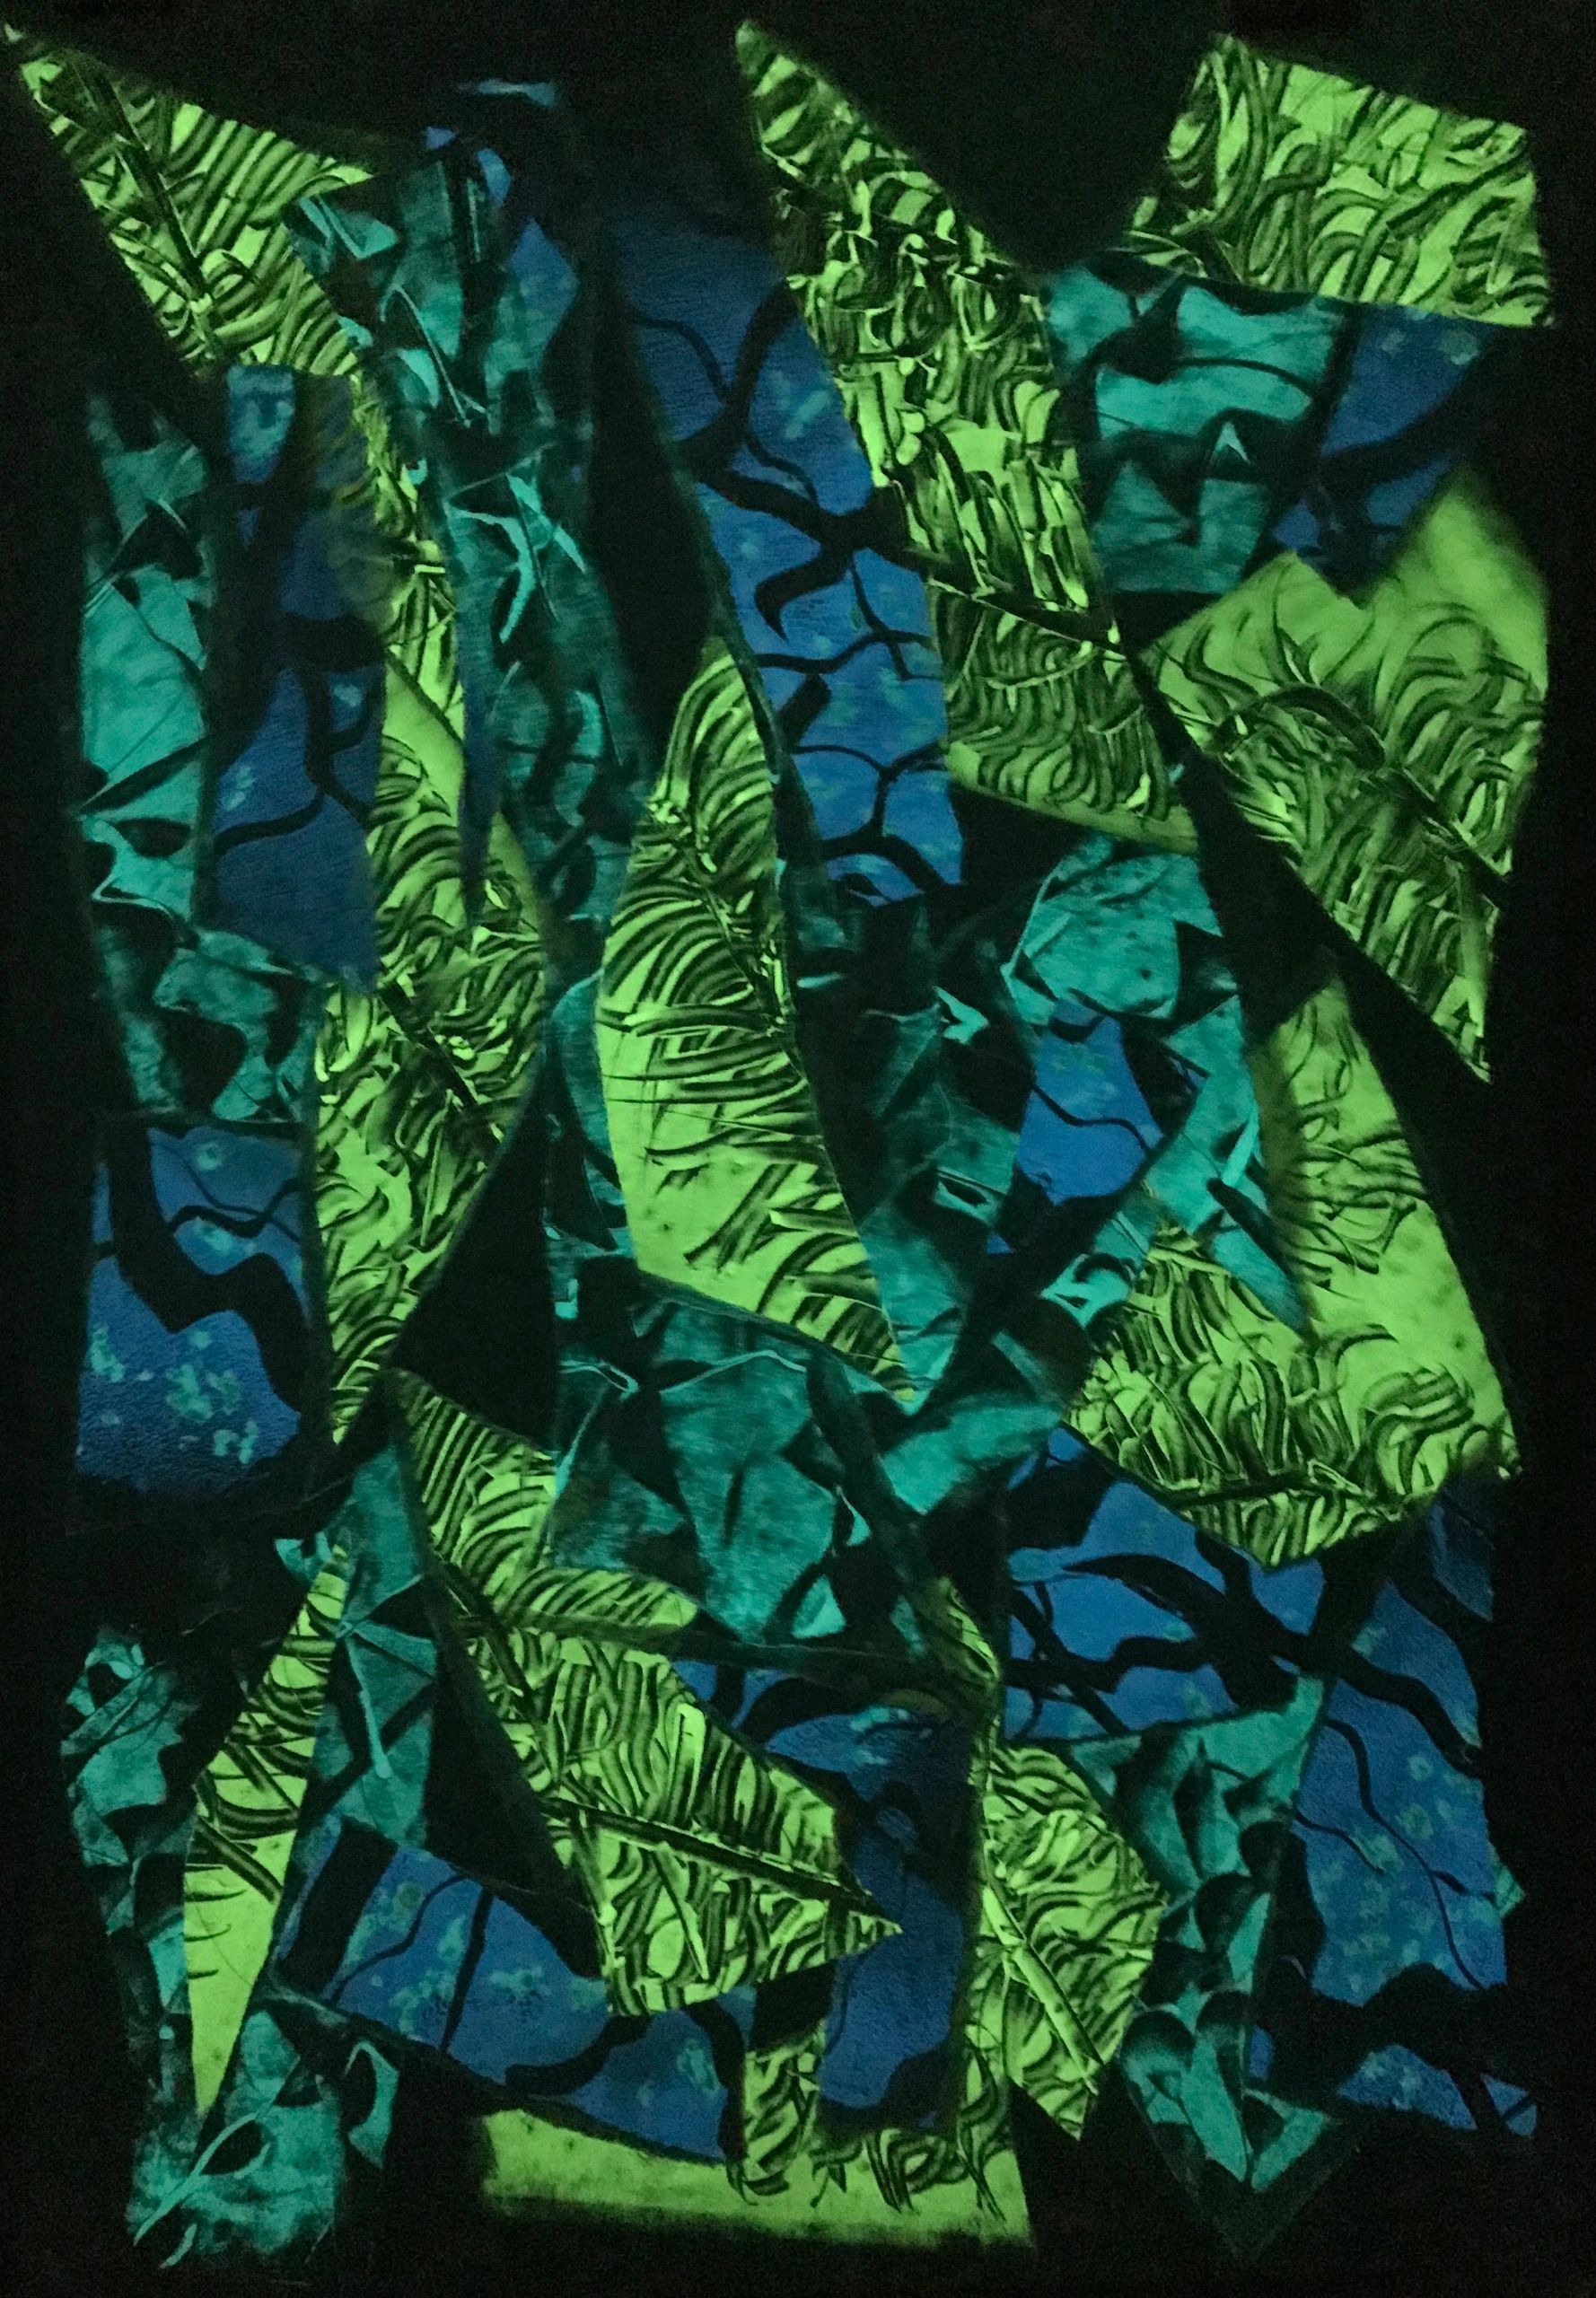 Glow in the dark collage